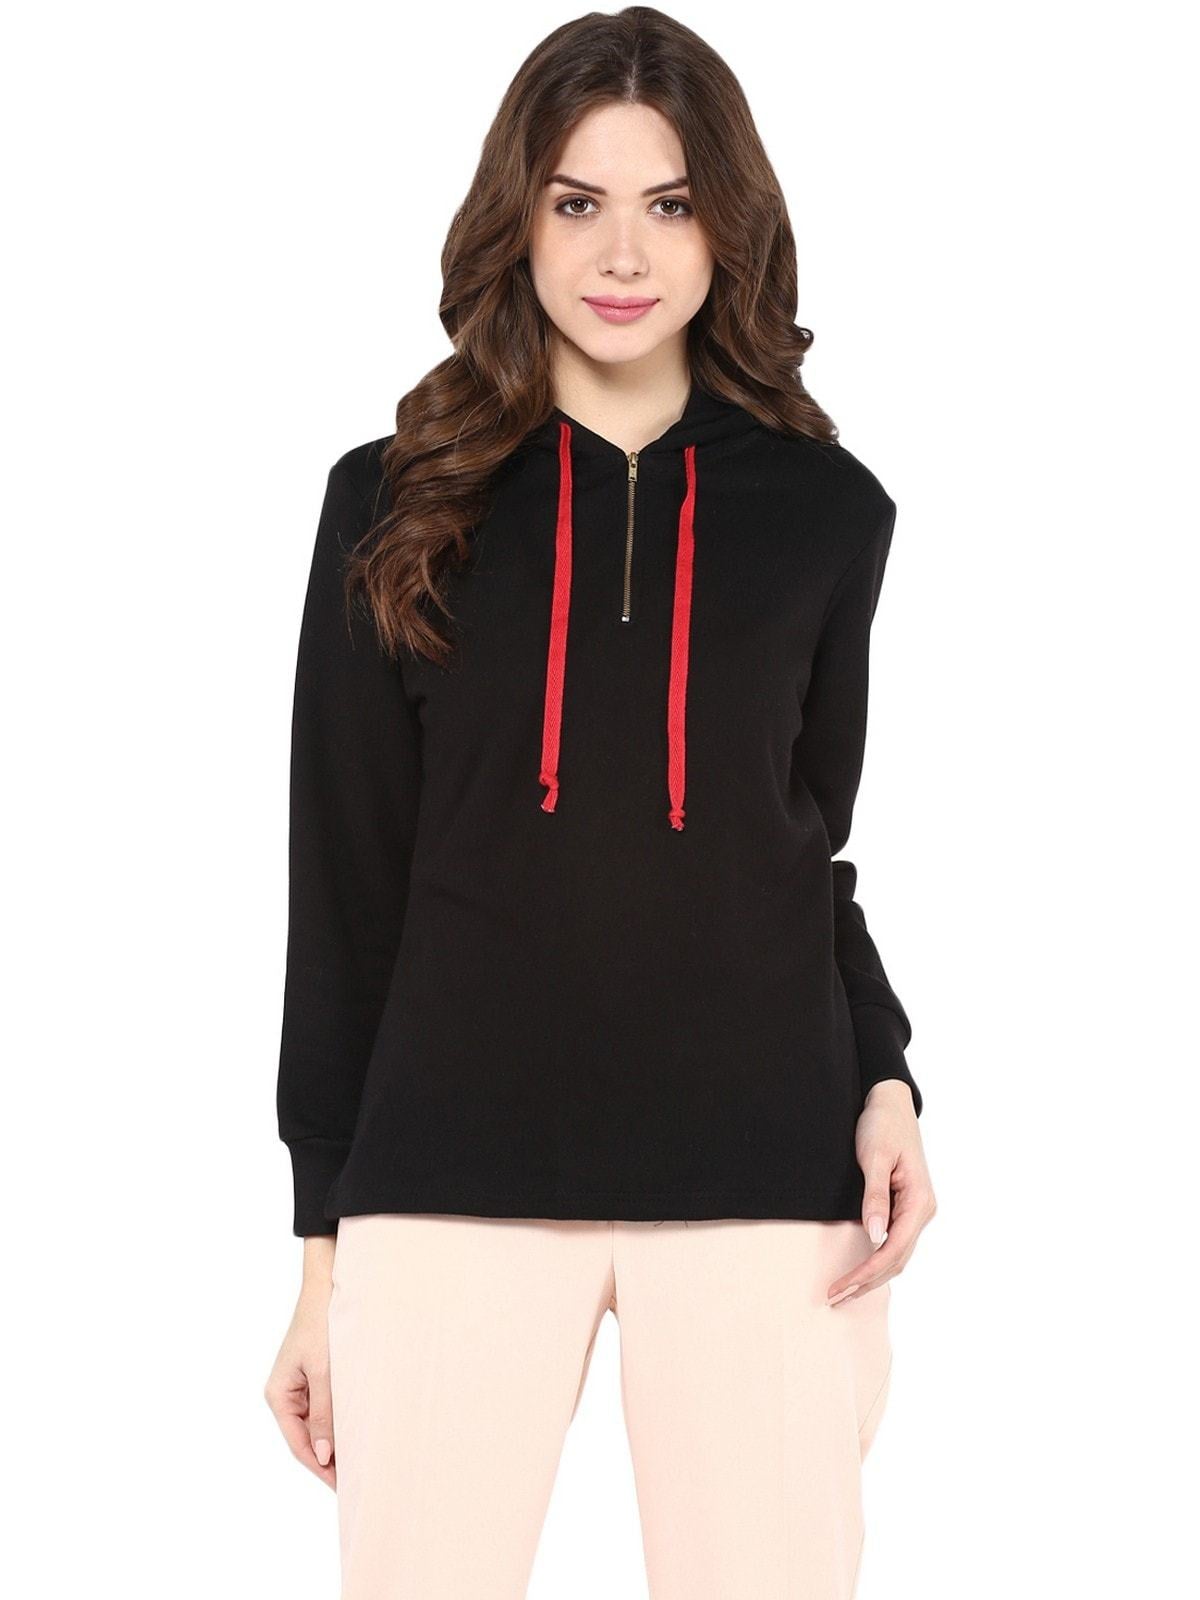 Women's Solid Hooded Sweatshirts With Zipper - Pannkh